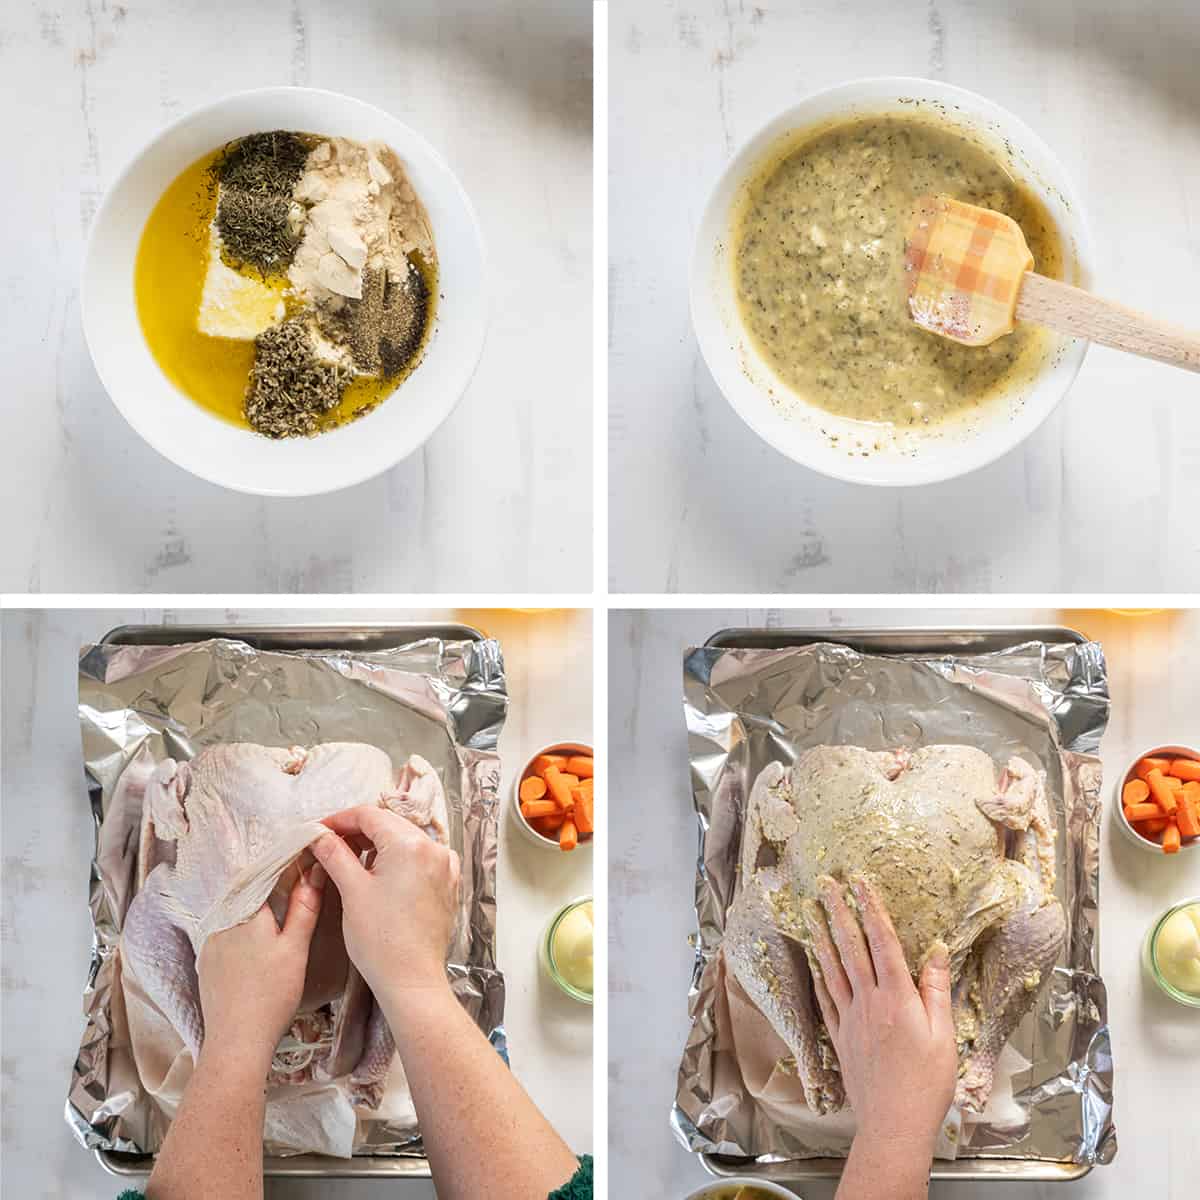 A butter herb mixture is spread over a turkey and under the skin.